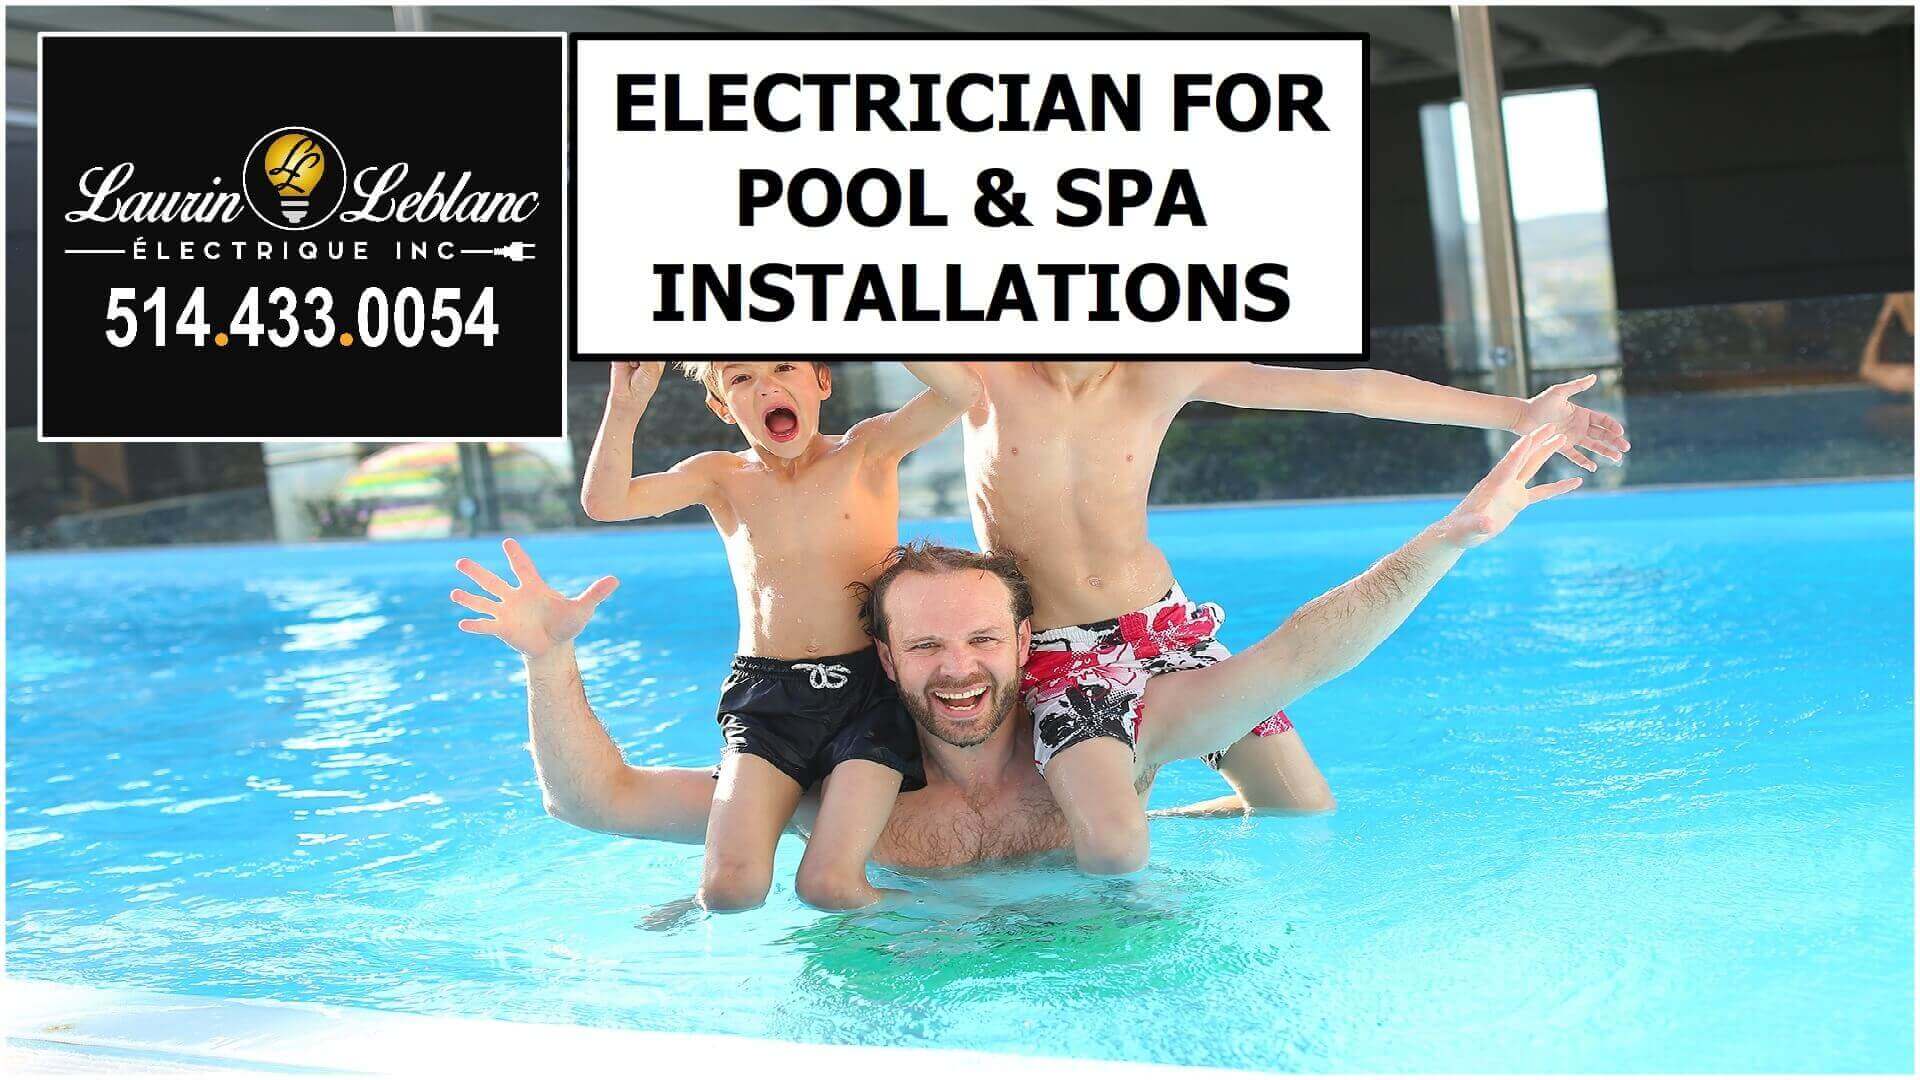 Pool Electrician in St-Laurent